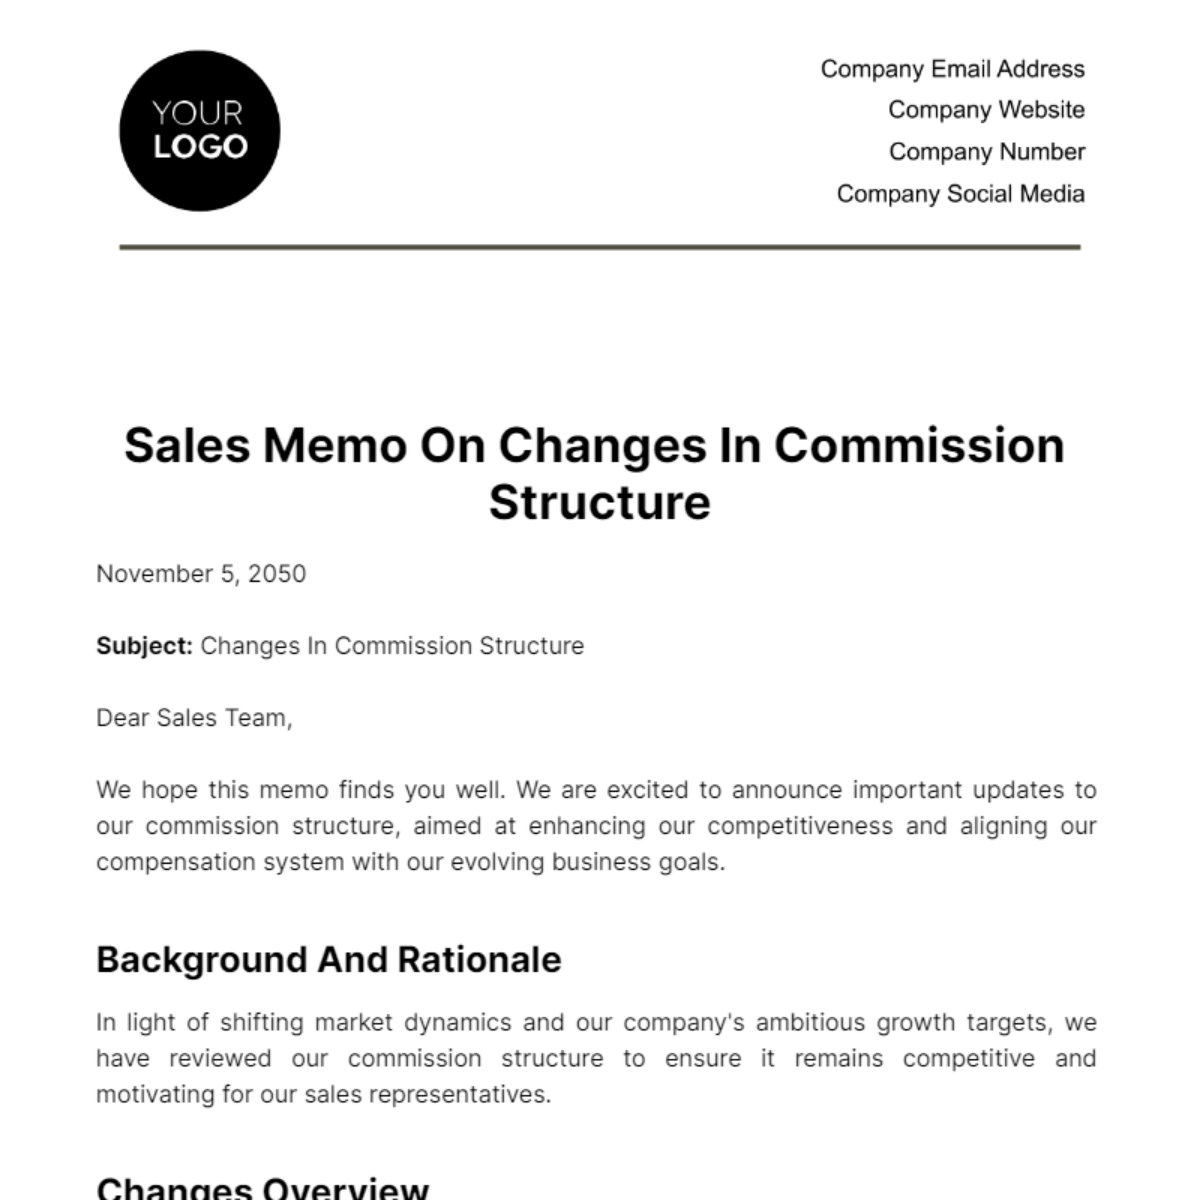 Free Sales Memo on Changes in Commission Structure Template